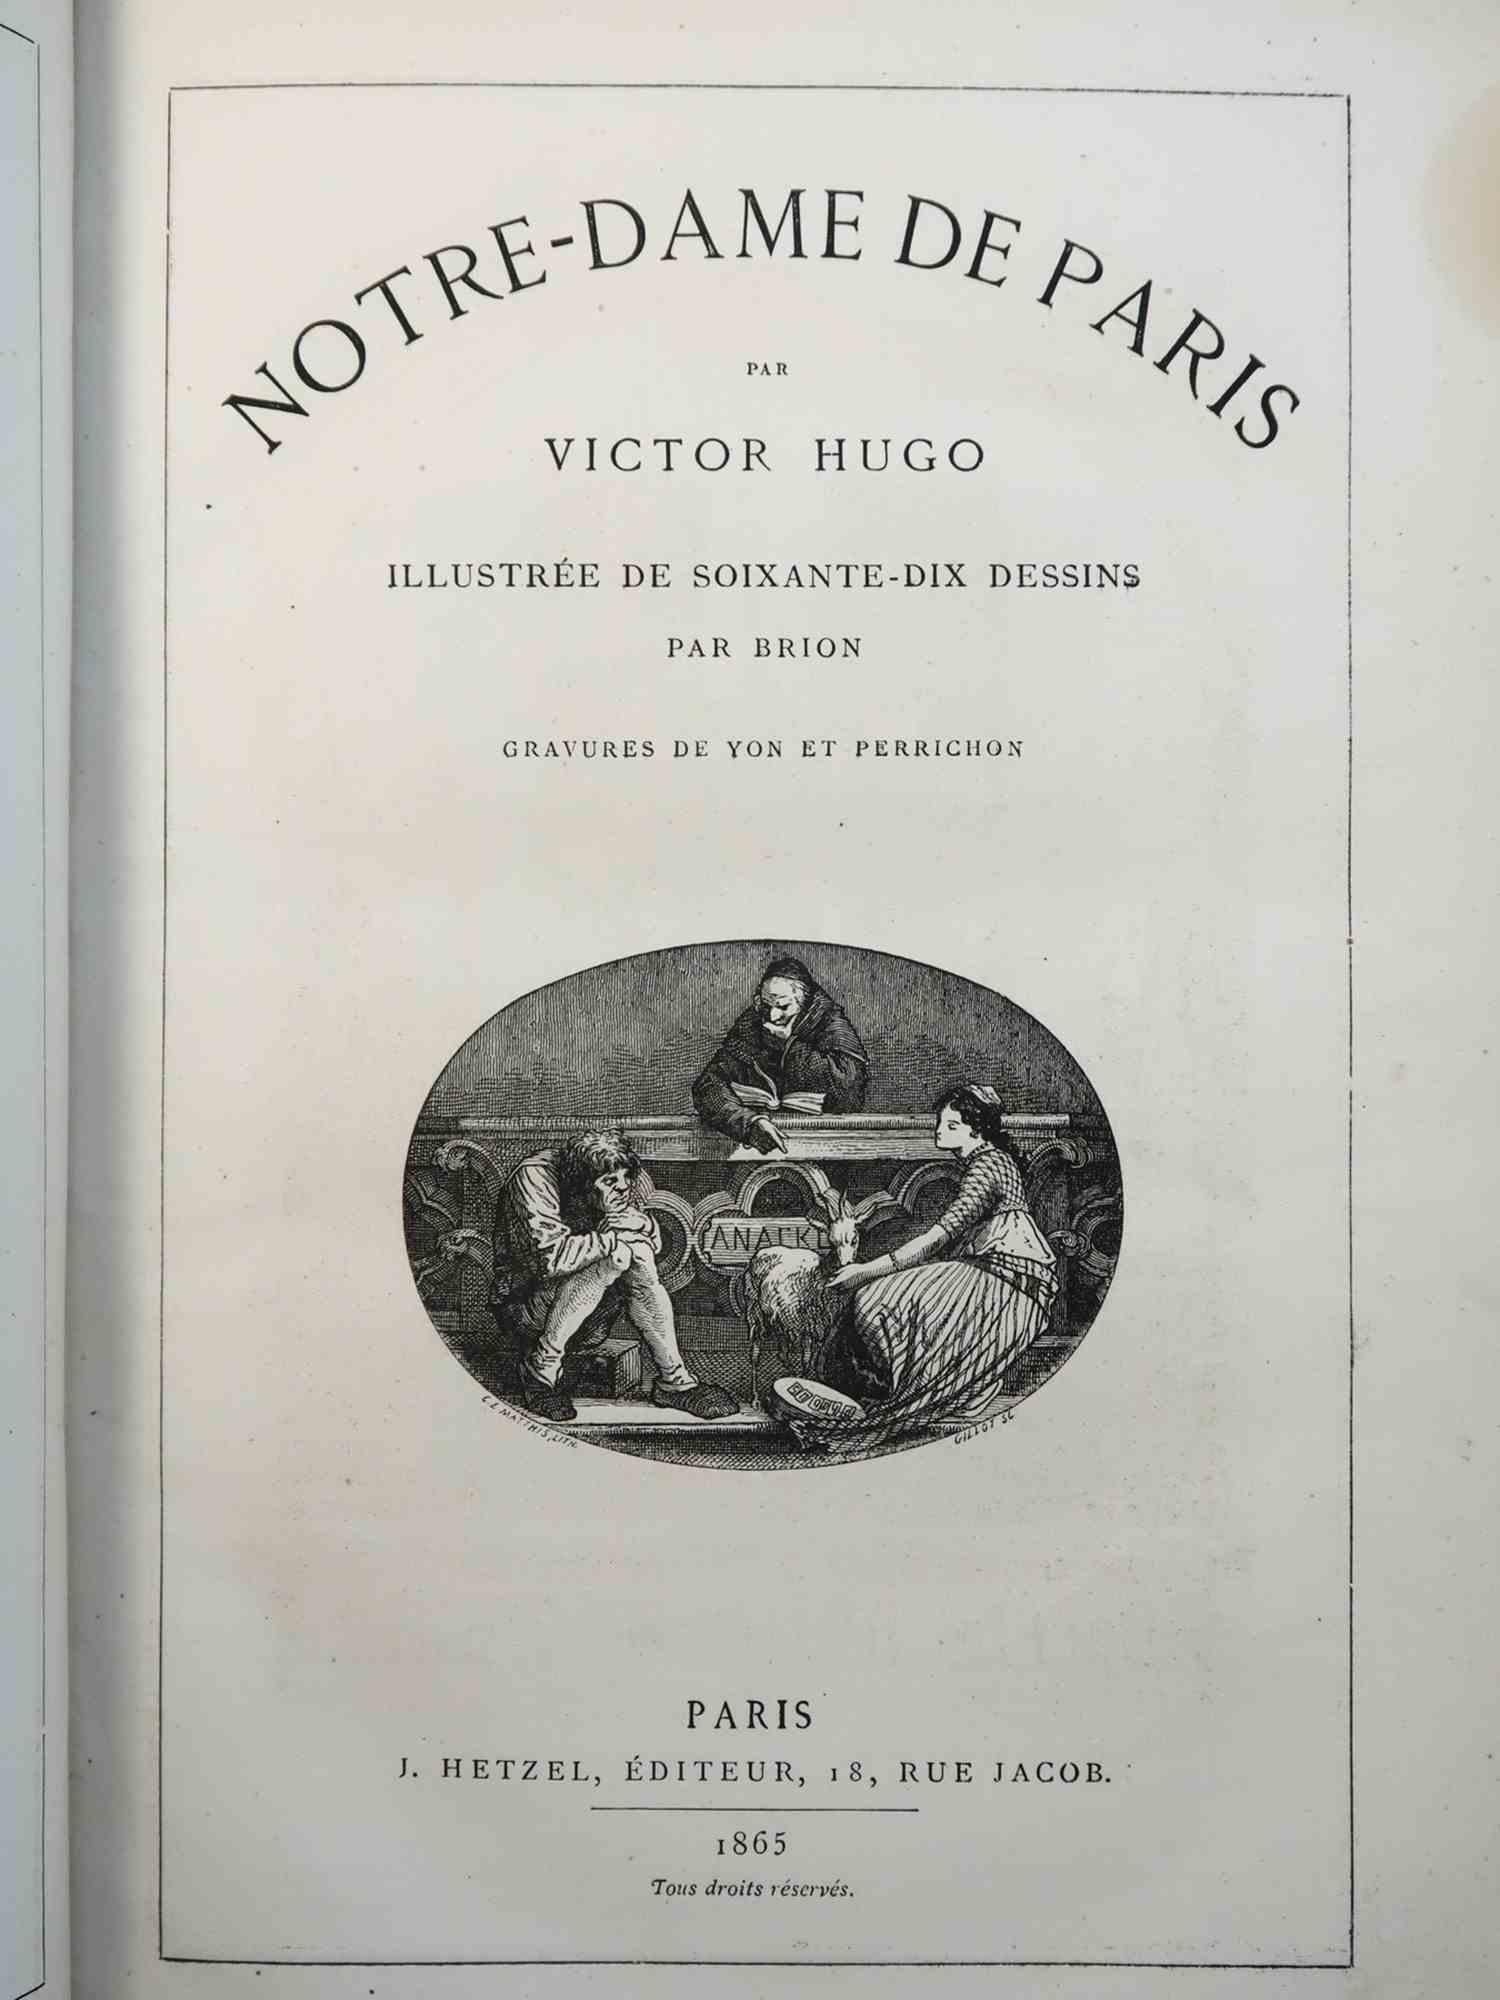 Notre Dame de Paris is a rare book by Victor Hugo published in 1865

Edited by Hetzel – Paris

Illustrated edition in a full blue calf binding “à la Bradel”.

3 tomes in one volume large in 8° (29x20cm) .

Original covers and 70 etchings after the